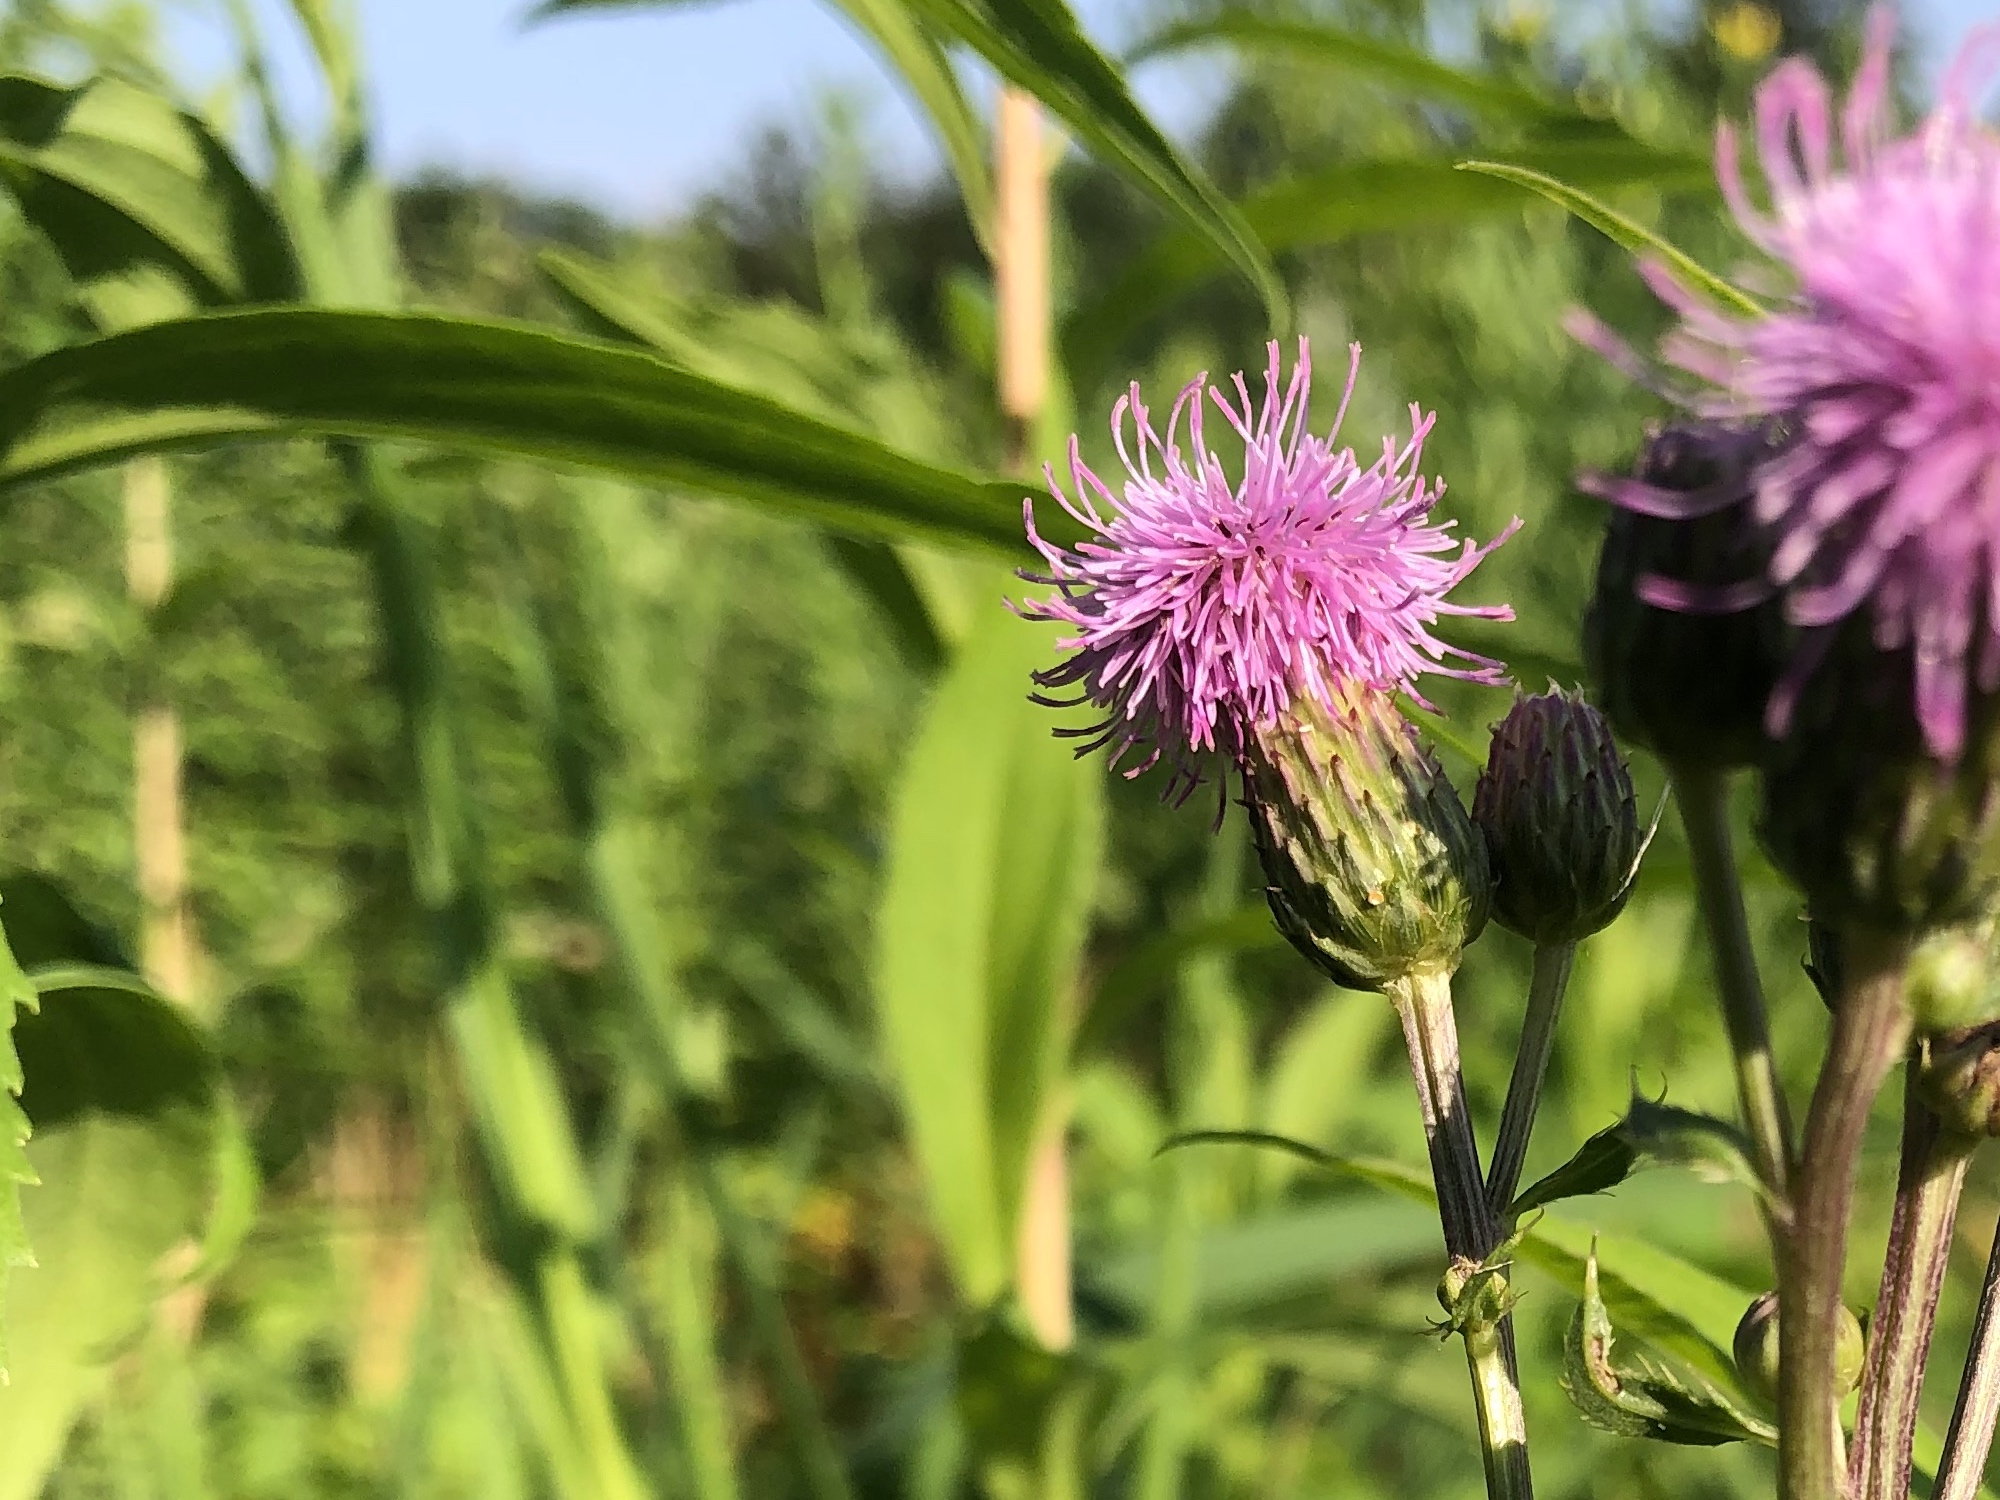 Canada Thistle on the shore of Lake Wingra in Wingra Park in Madison, Wisconsin on July 7, 2019.